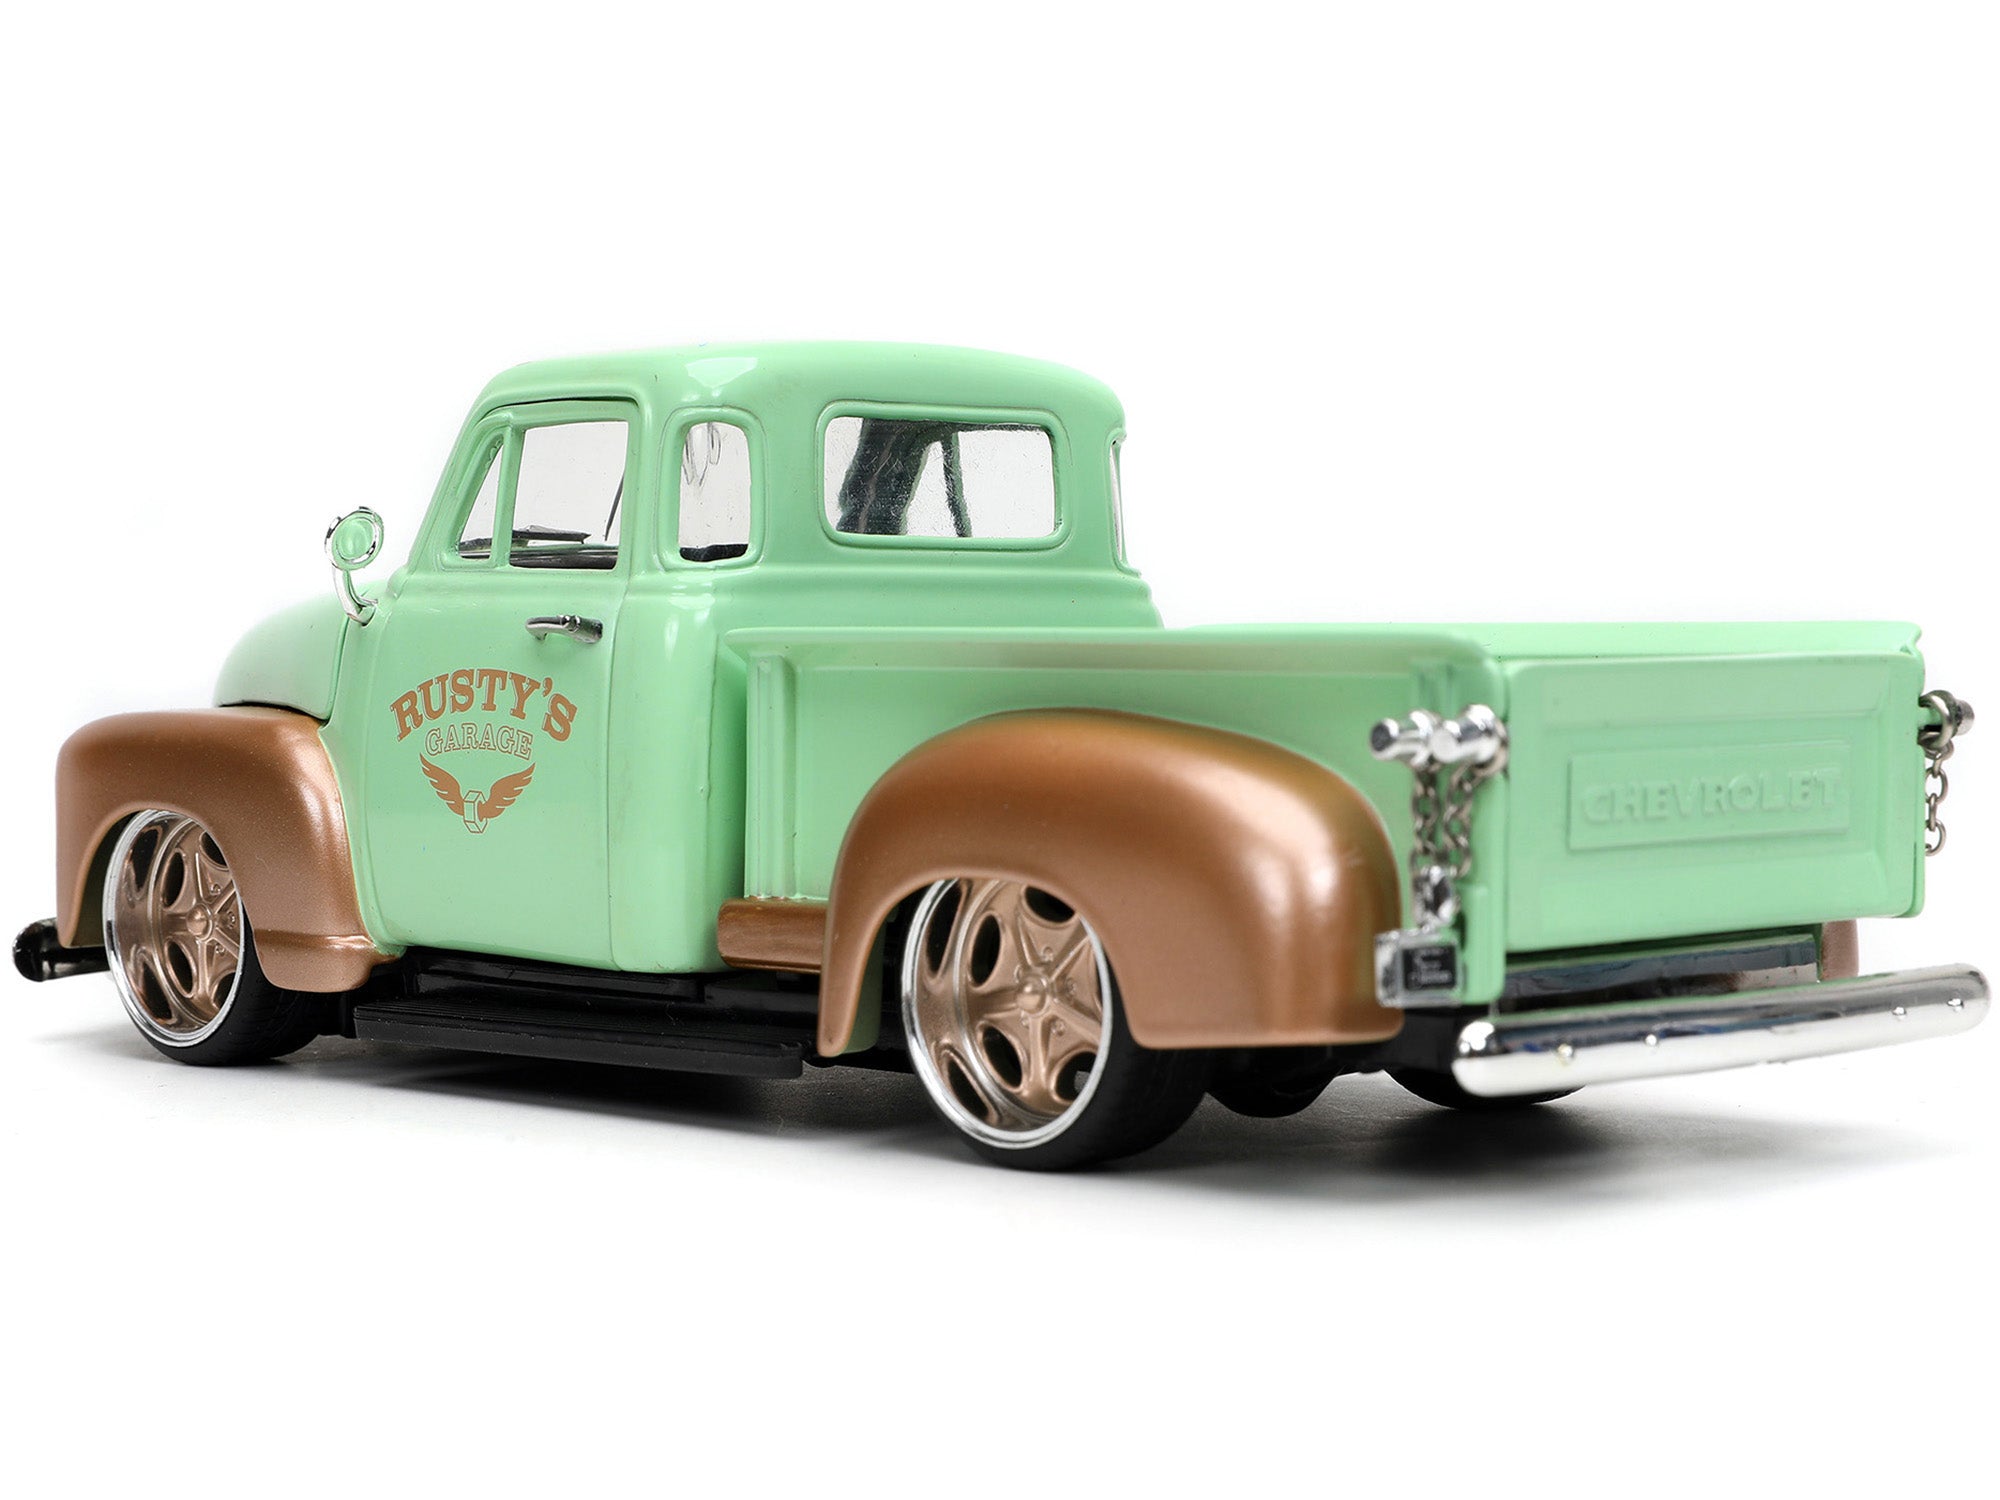 1953 Chevrolet 3100 Pickup Truck Light Green and Gold Metallic "Rusty's Garage" with Extra Wheels "Just Trucks" Series 1/24 Diecast Model Car by Jada